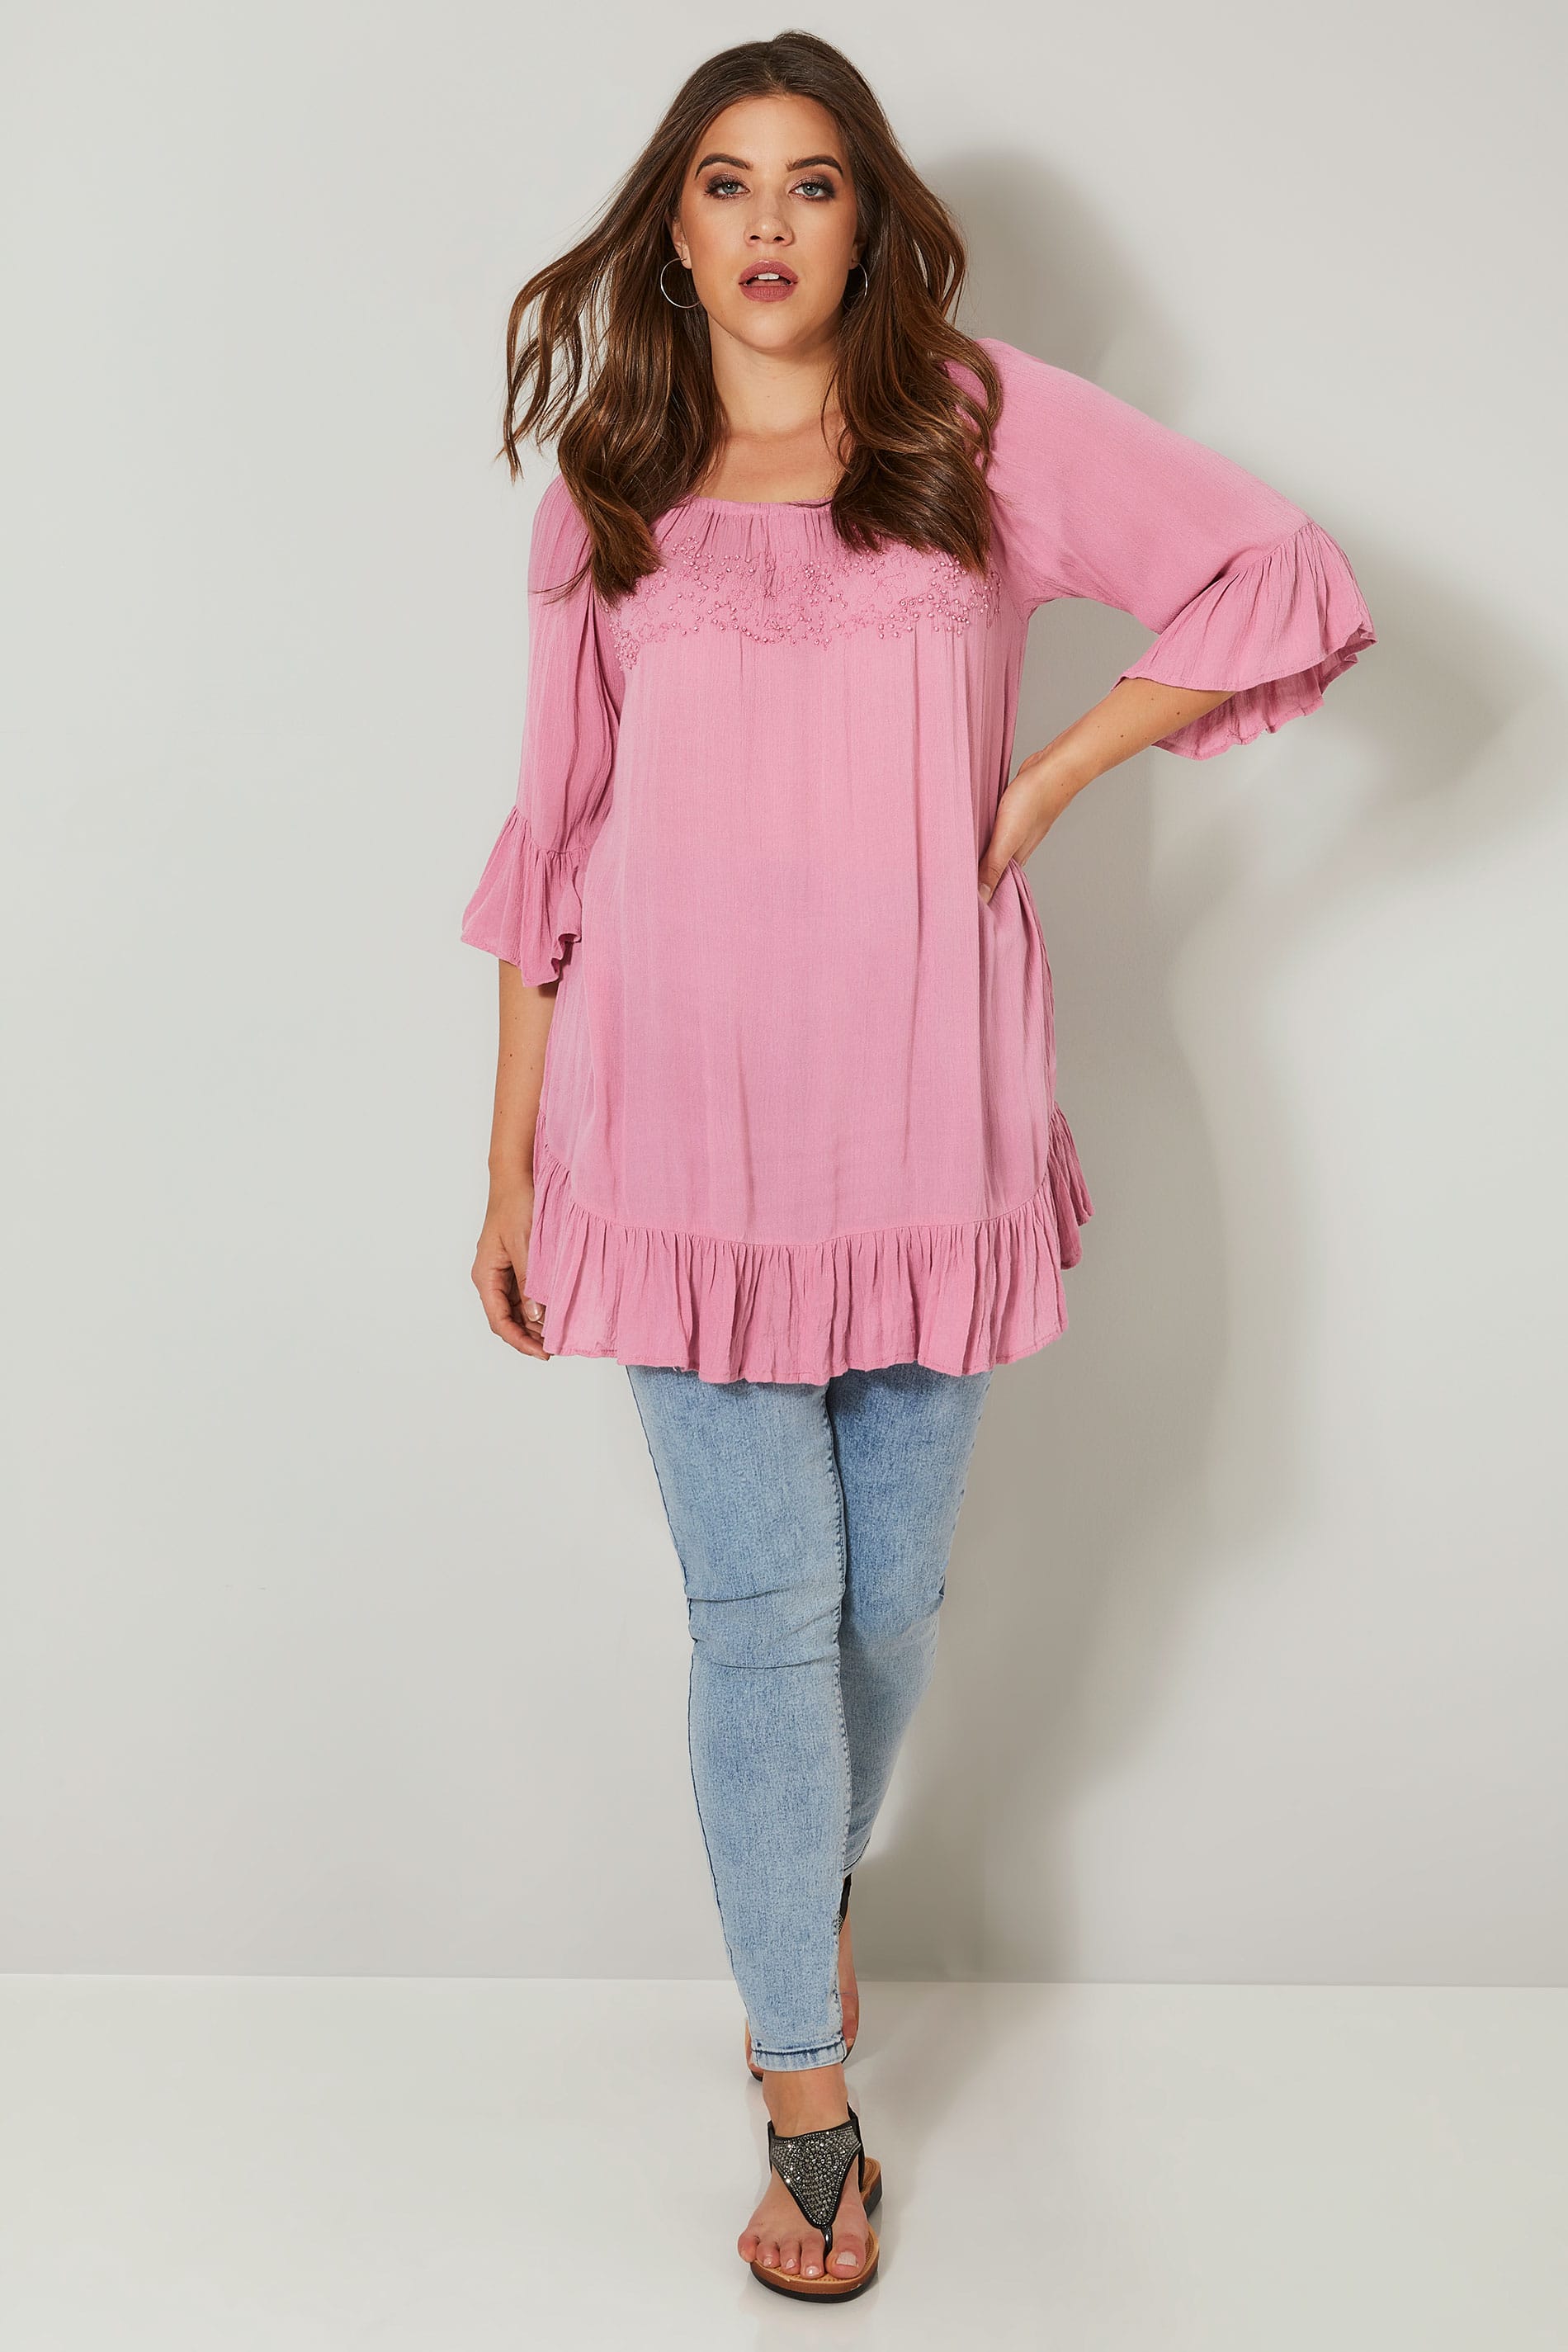 Dusky Pink Bardot Gypsy Top With Beaded Details & Flute Sleeves, Plus ...